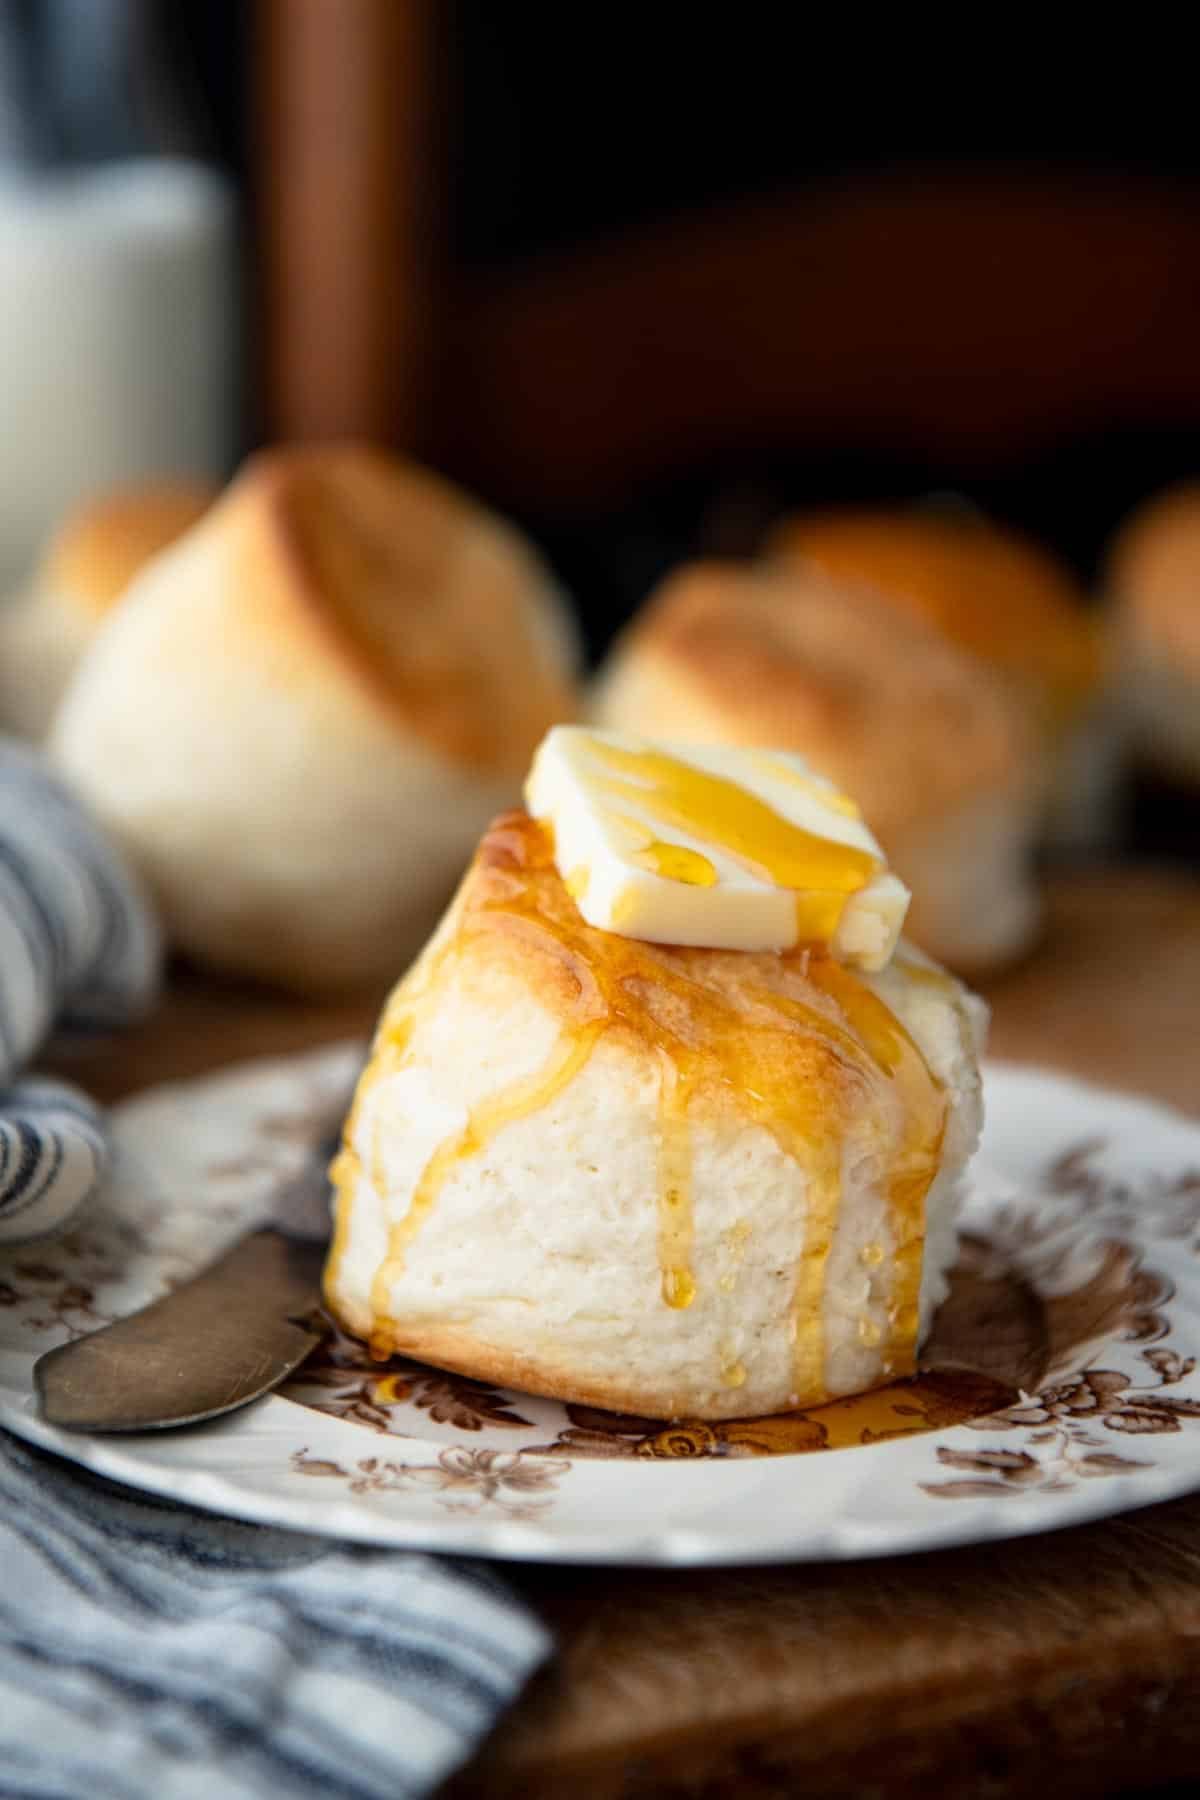 Cream biscuits on a plate drizzled with honey.